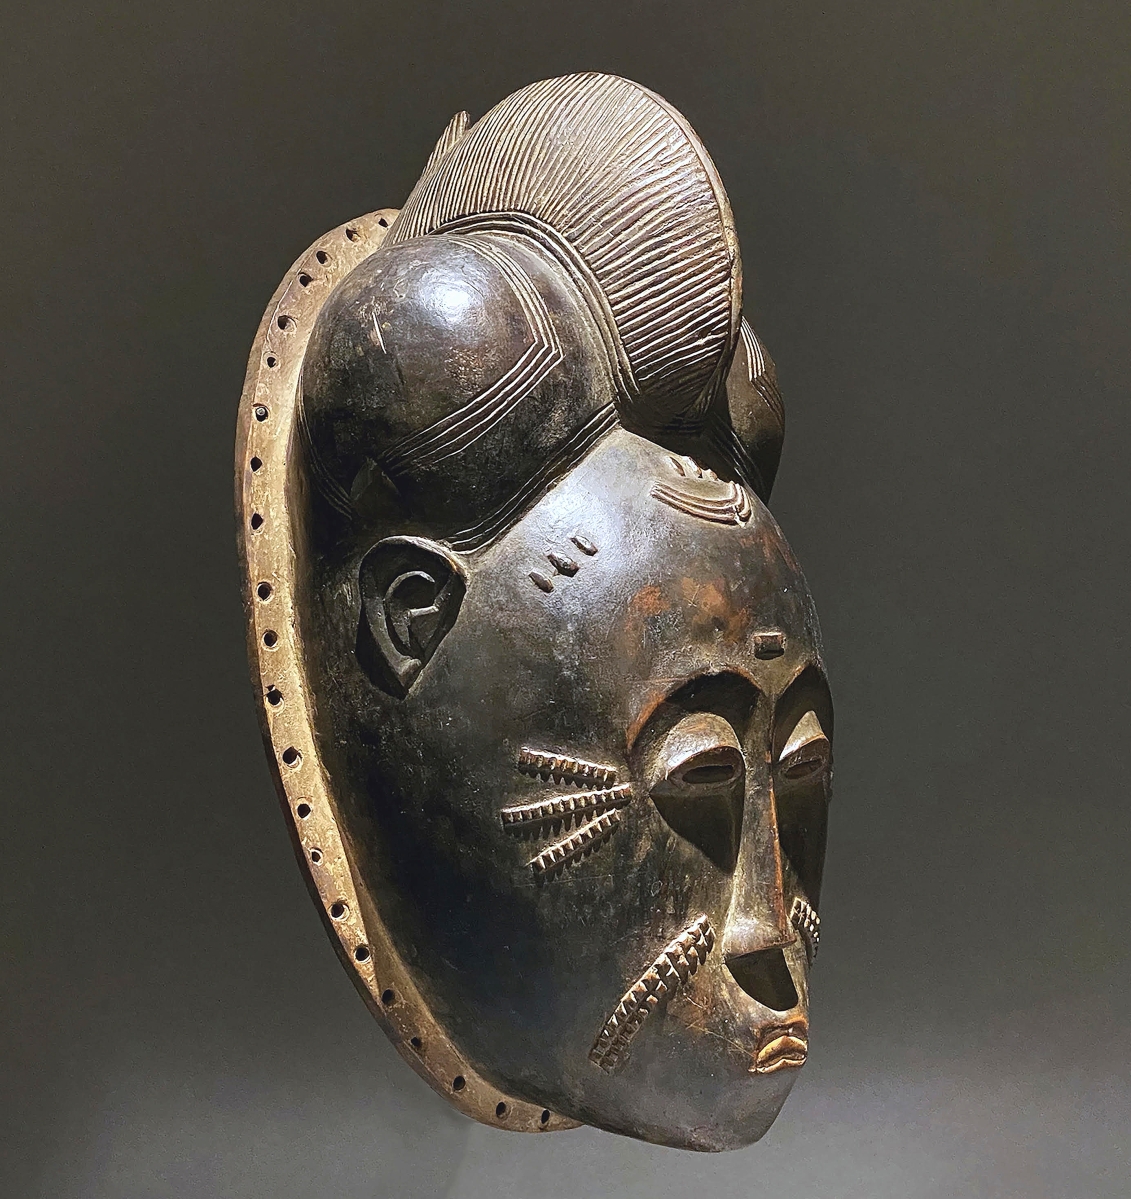 Mark Eglinton, New York City, sold this Baule mask from the Ivory Coast that had provenance to Bernard & Bertrand in Nice, France, and the Galerie de Monbrison in Paris, as well as exhibition history in Paris and Hong Kong.